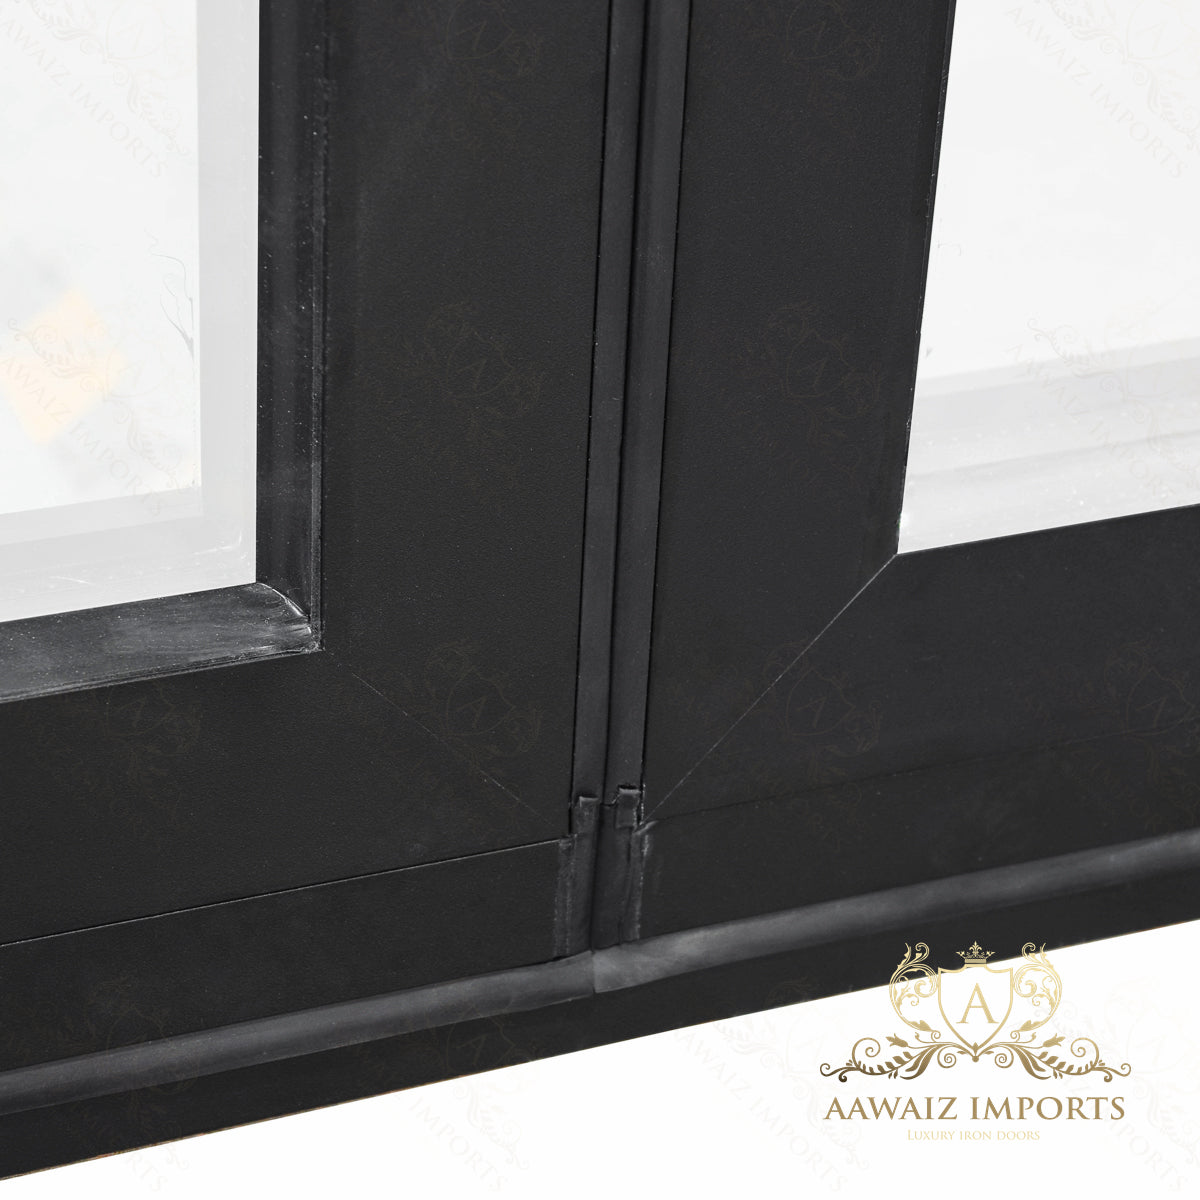 8 Ft Wide By 7 Ft Tall (96" By 84") Aluminum Bi Fold Patio Door Outswing  Thermal Break Insulated Matt Black Finish